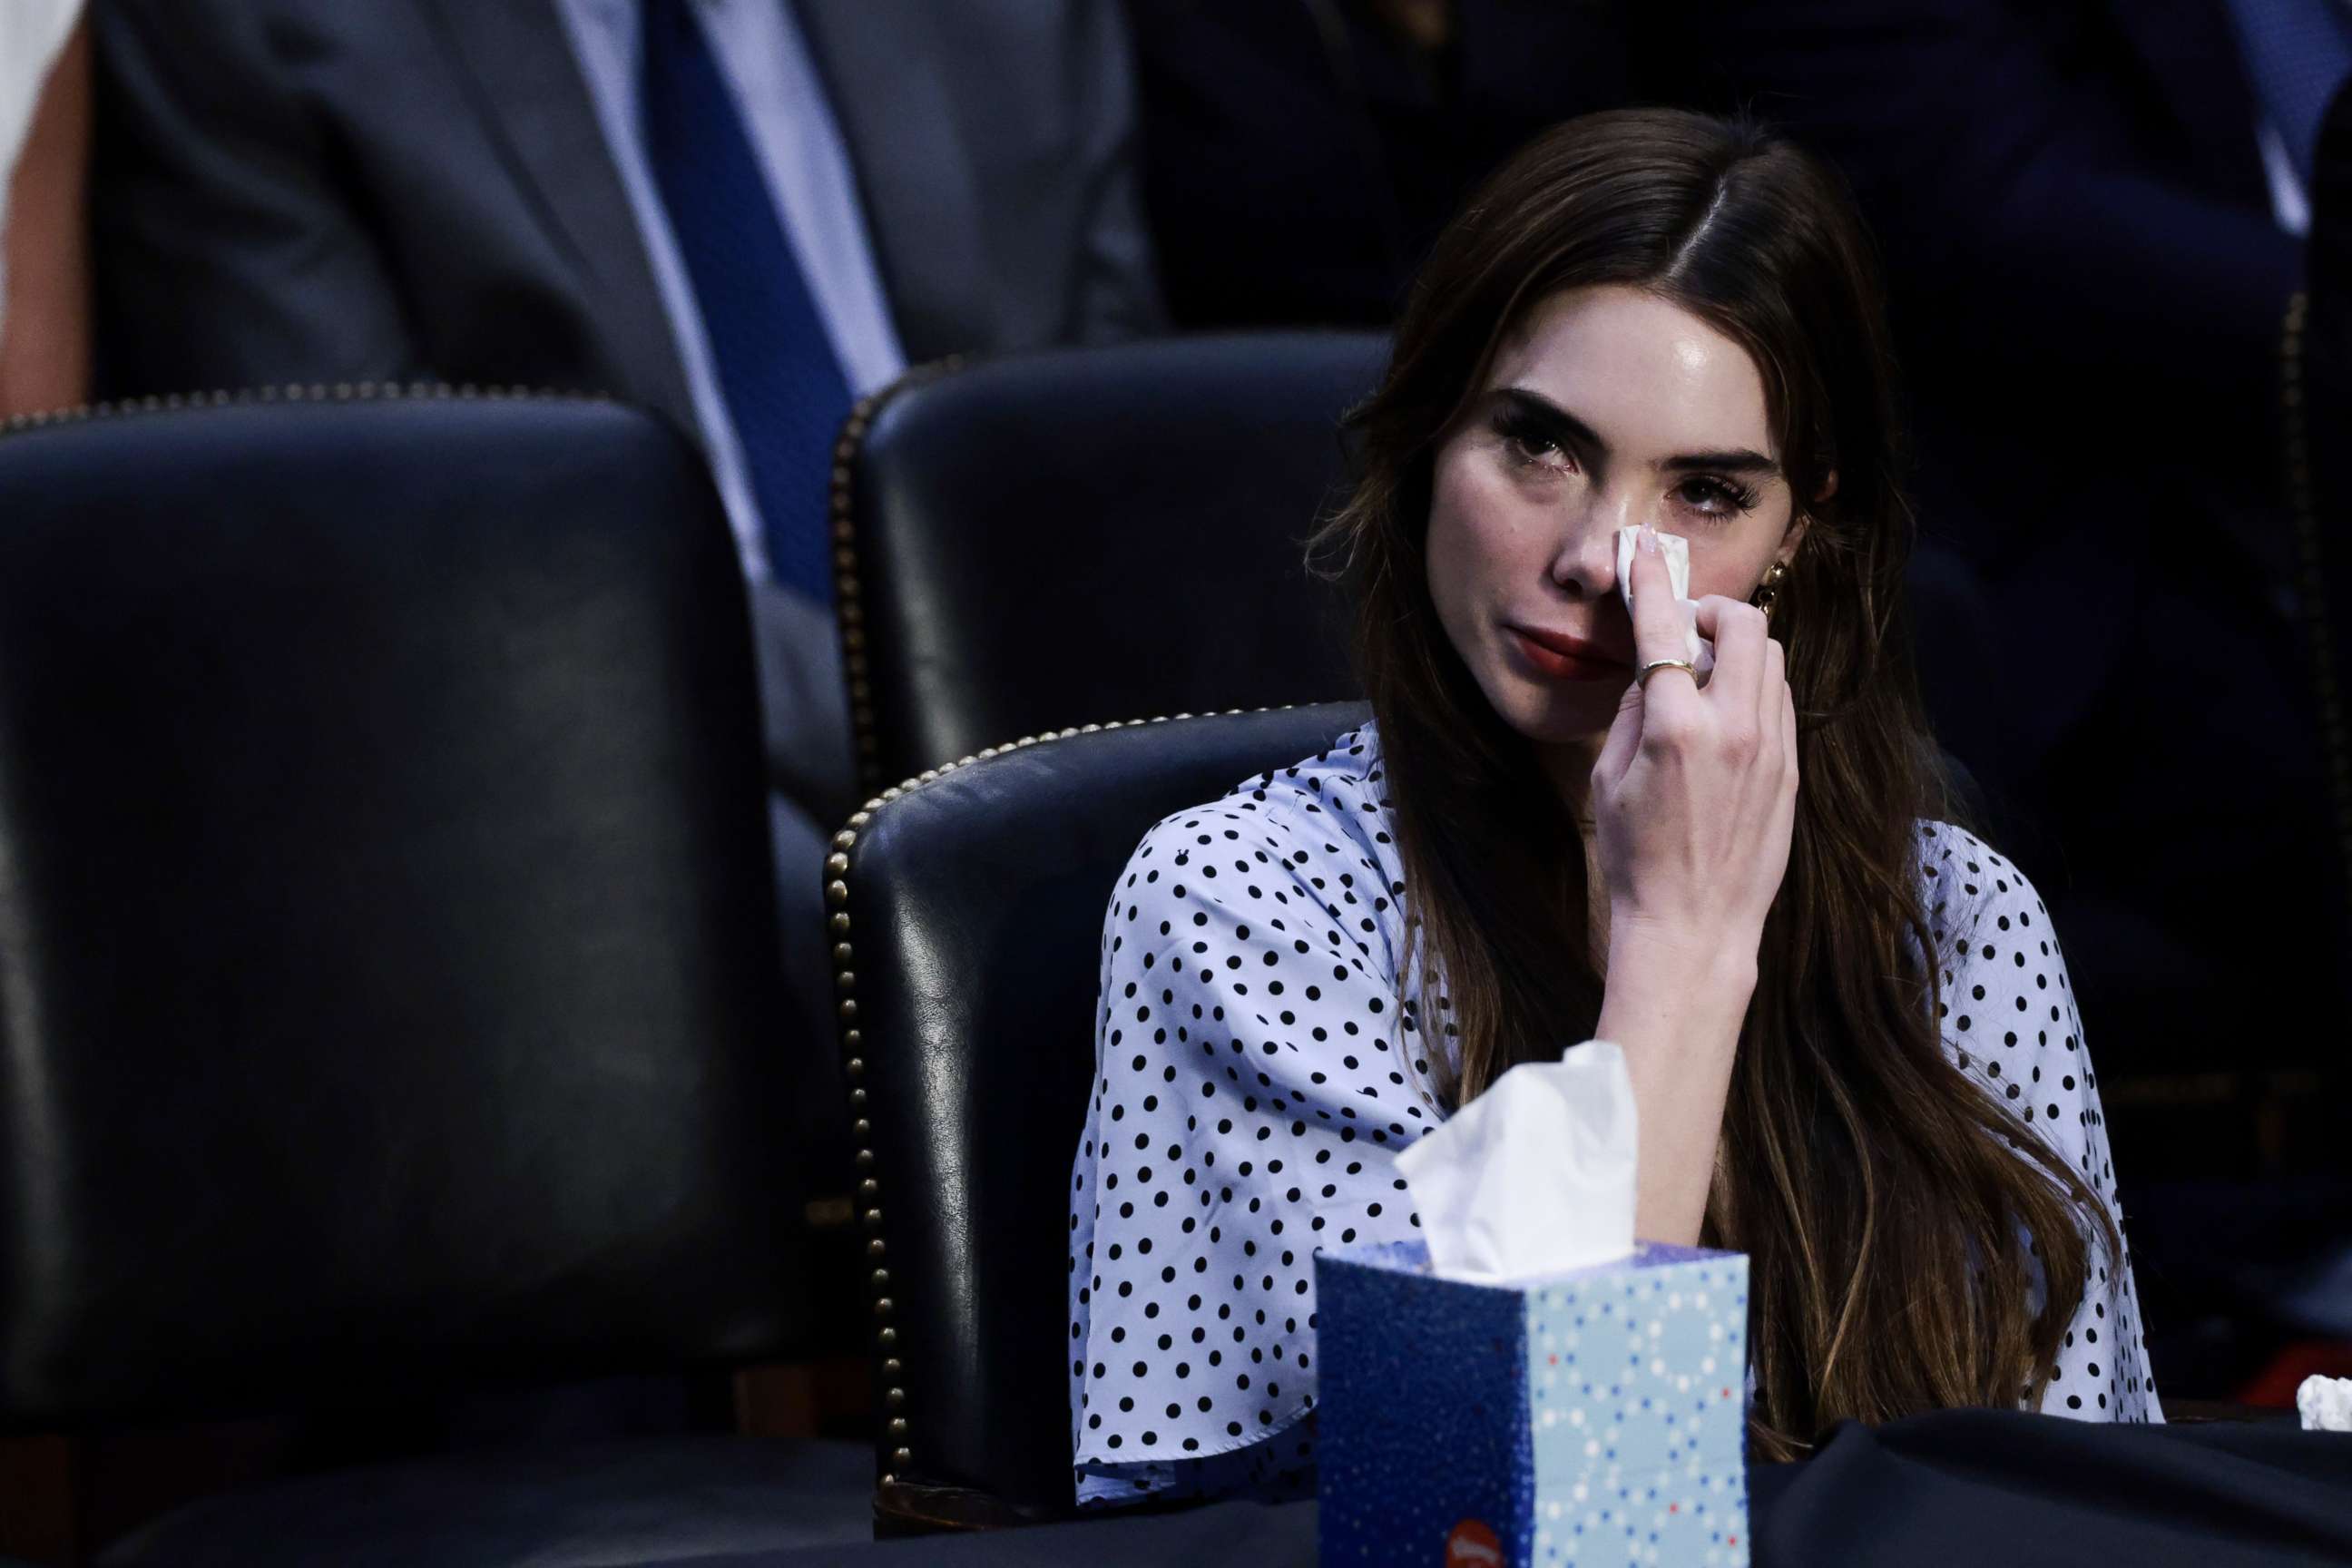 PHOTO: U.S. Olympic Gymnast McKayla Maroney wipes tears from her eyes during a Senate Judiciary hearing about the inspector general's report on the FBI handling of the Larry Nassar investigation of sexual abuse, on Sept. 15, 2021 in Washington, DC.